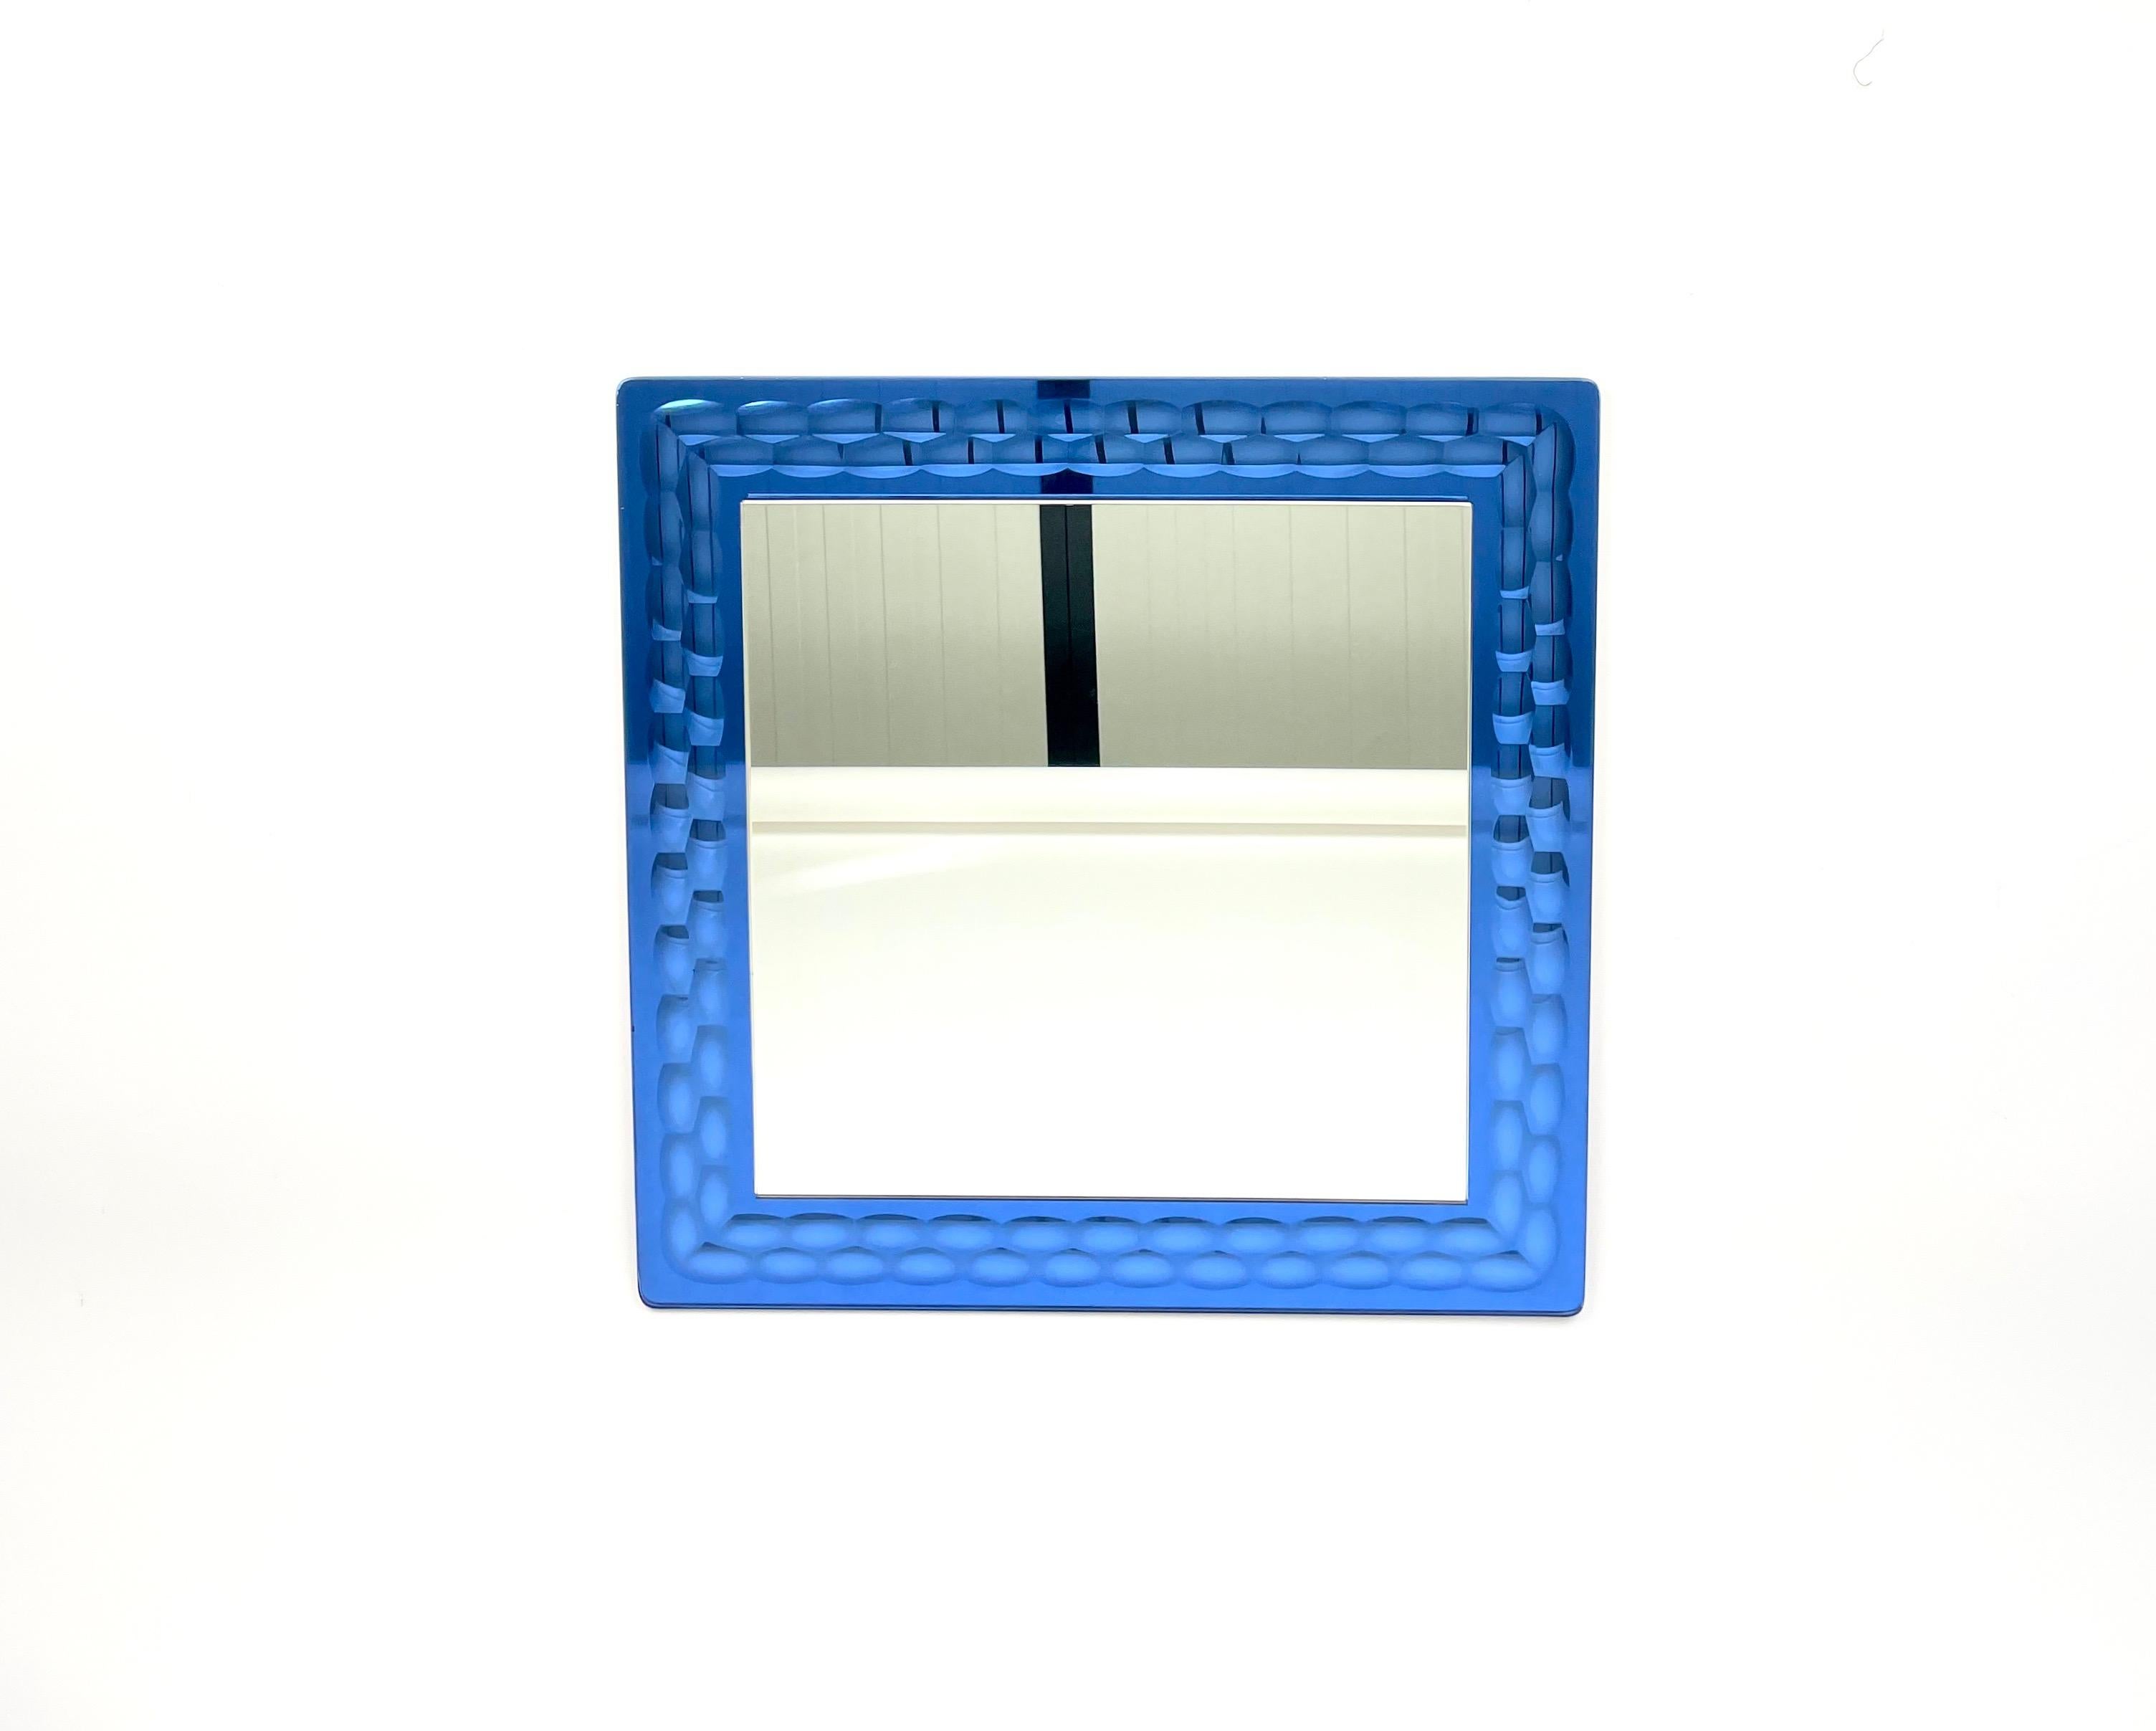 Blue square wall mirror by the Italian designer Antonio Lupi for Crystal Luxor.

Made in Italy in the 1960s.